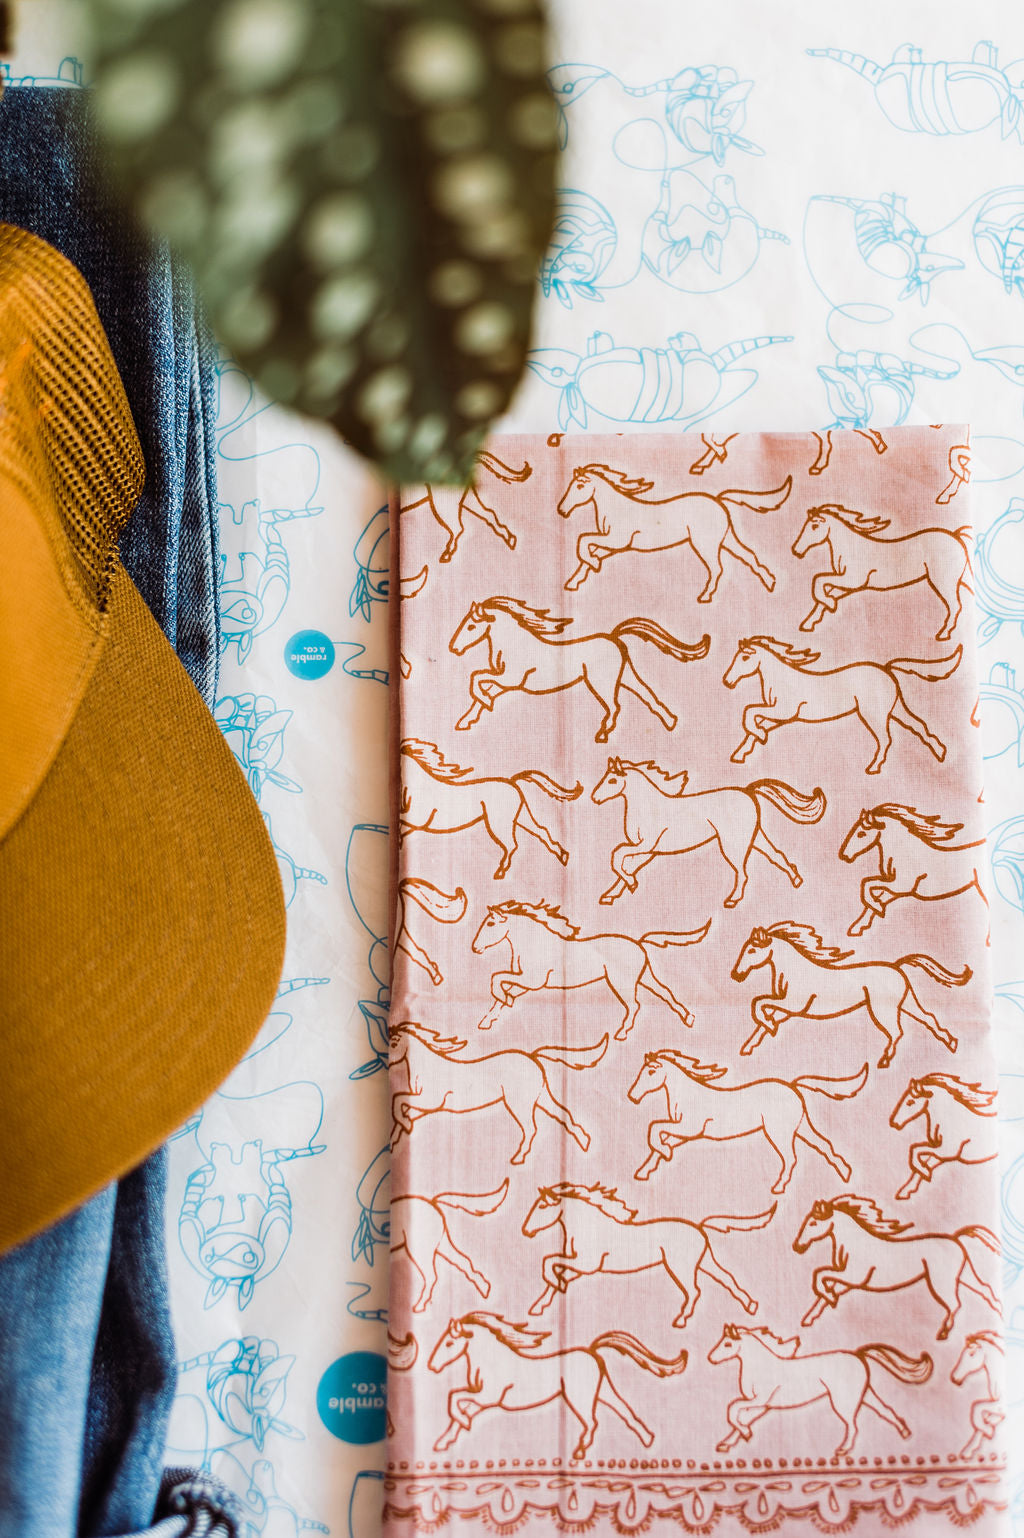 Pink bandana with brown outlined horses design by Hemlock Goods | you can shop now at  shop.rambleandcompany.com or visit our storefront in downtown Wichita Falls, Texas || small batch + hand printed tees | home goods | paper goods | gifts + more